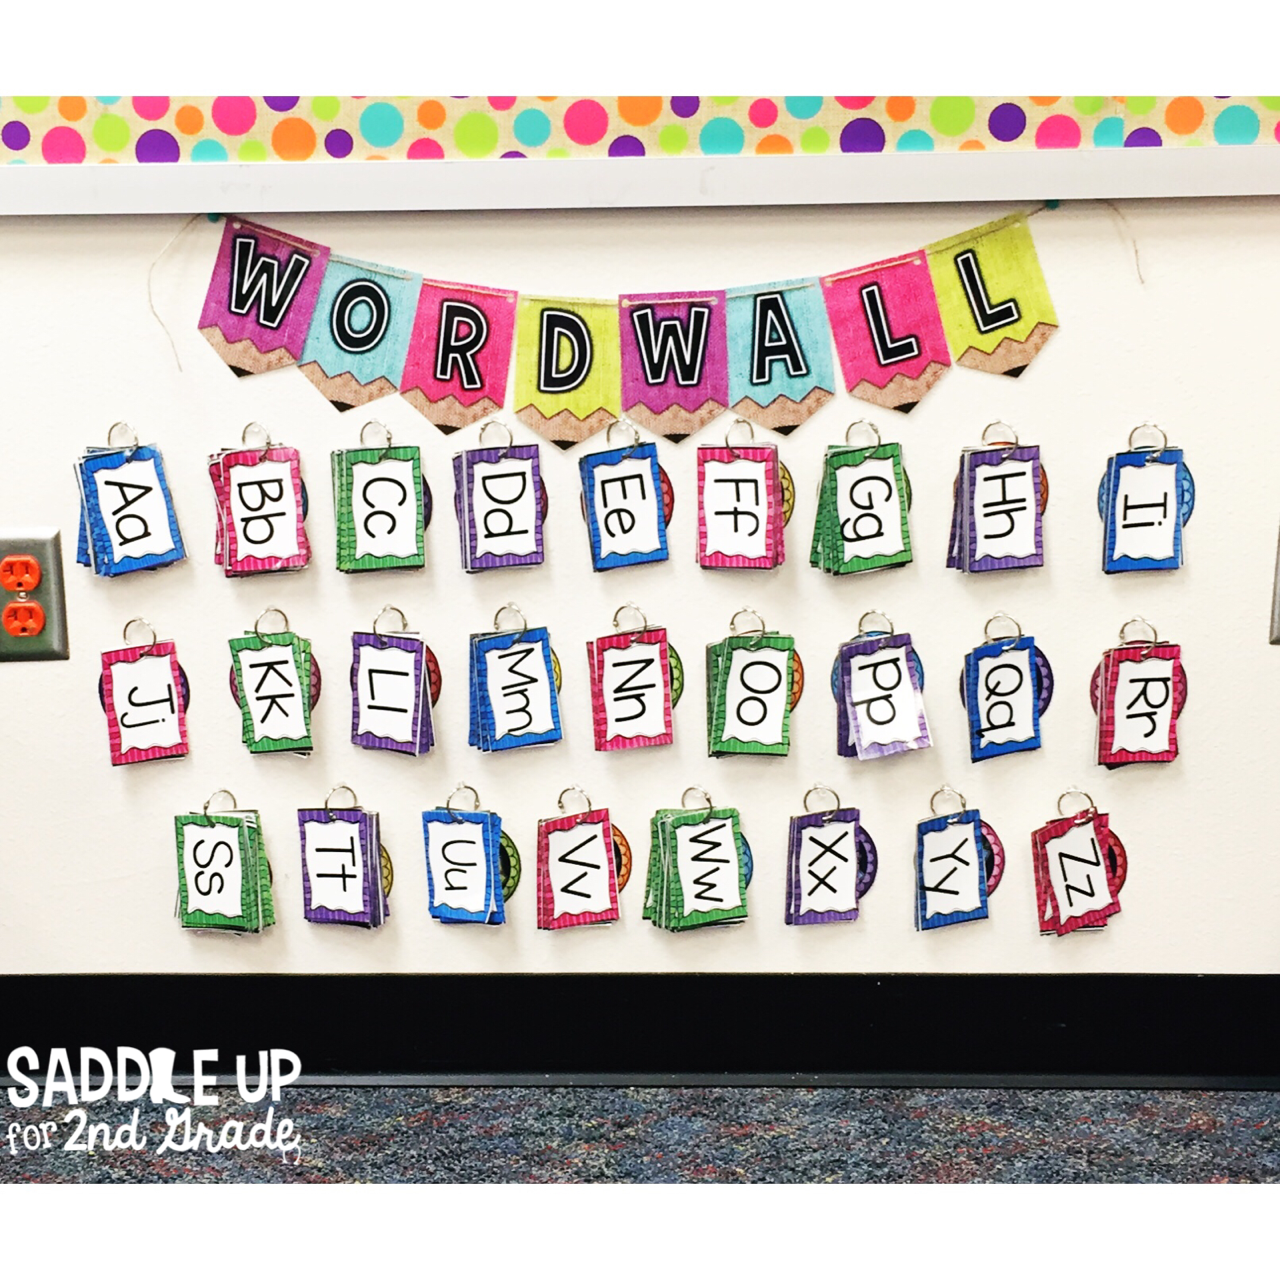 The blog posts features a tour of my 2nd grade classroom with a burlap and bright theme! My interactive word wall is one of my favorite classroom tools. 